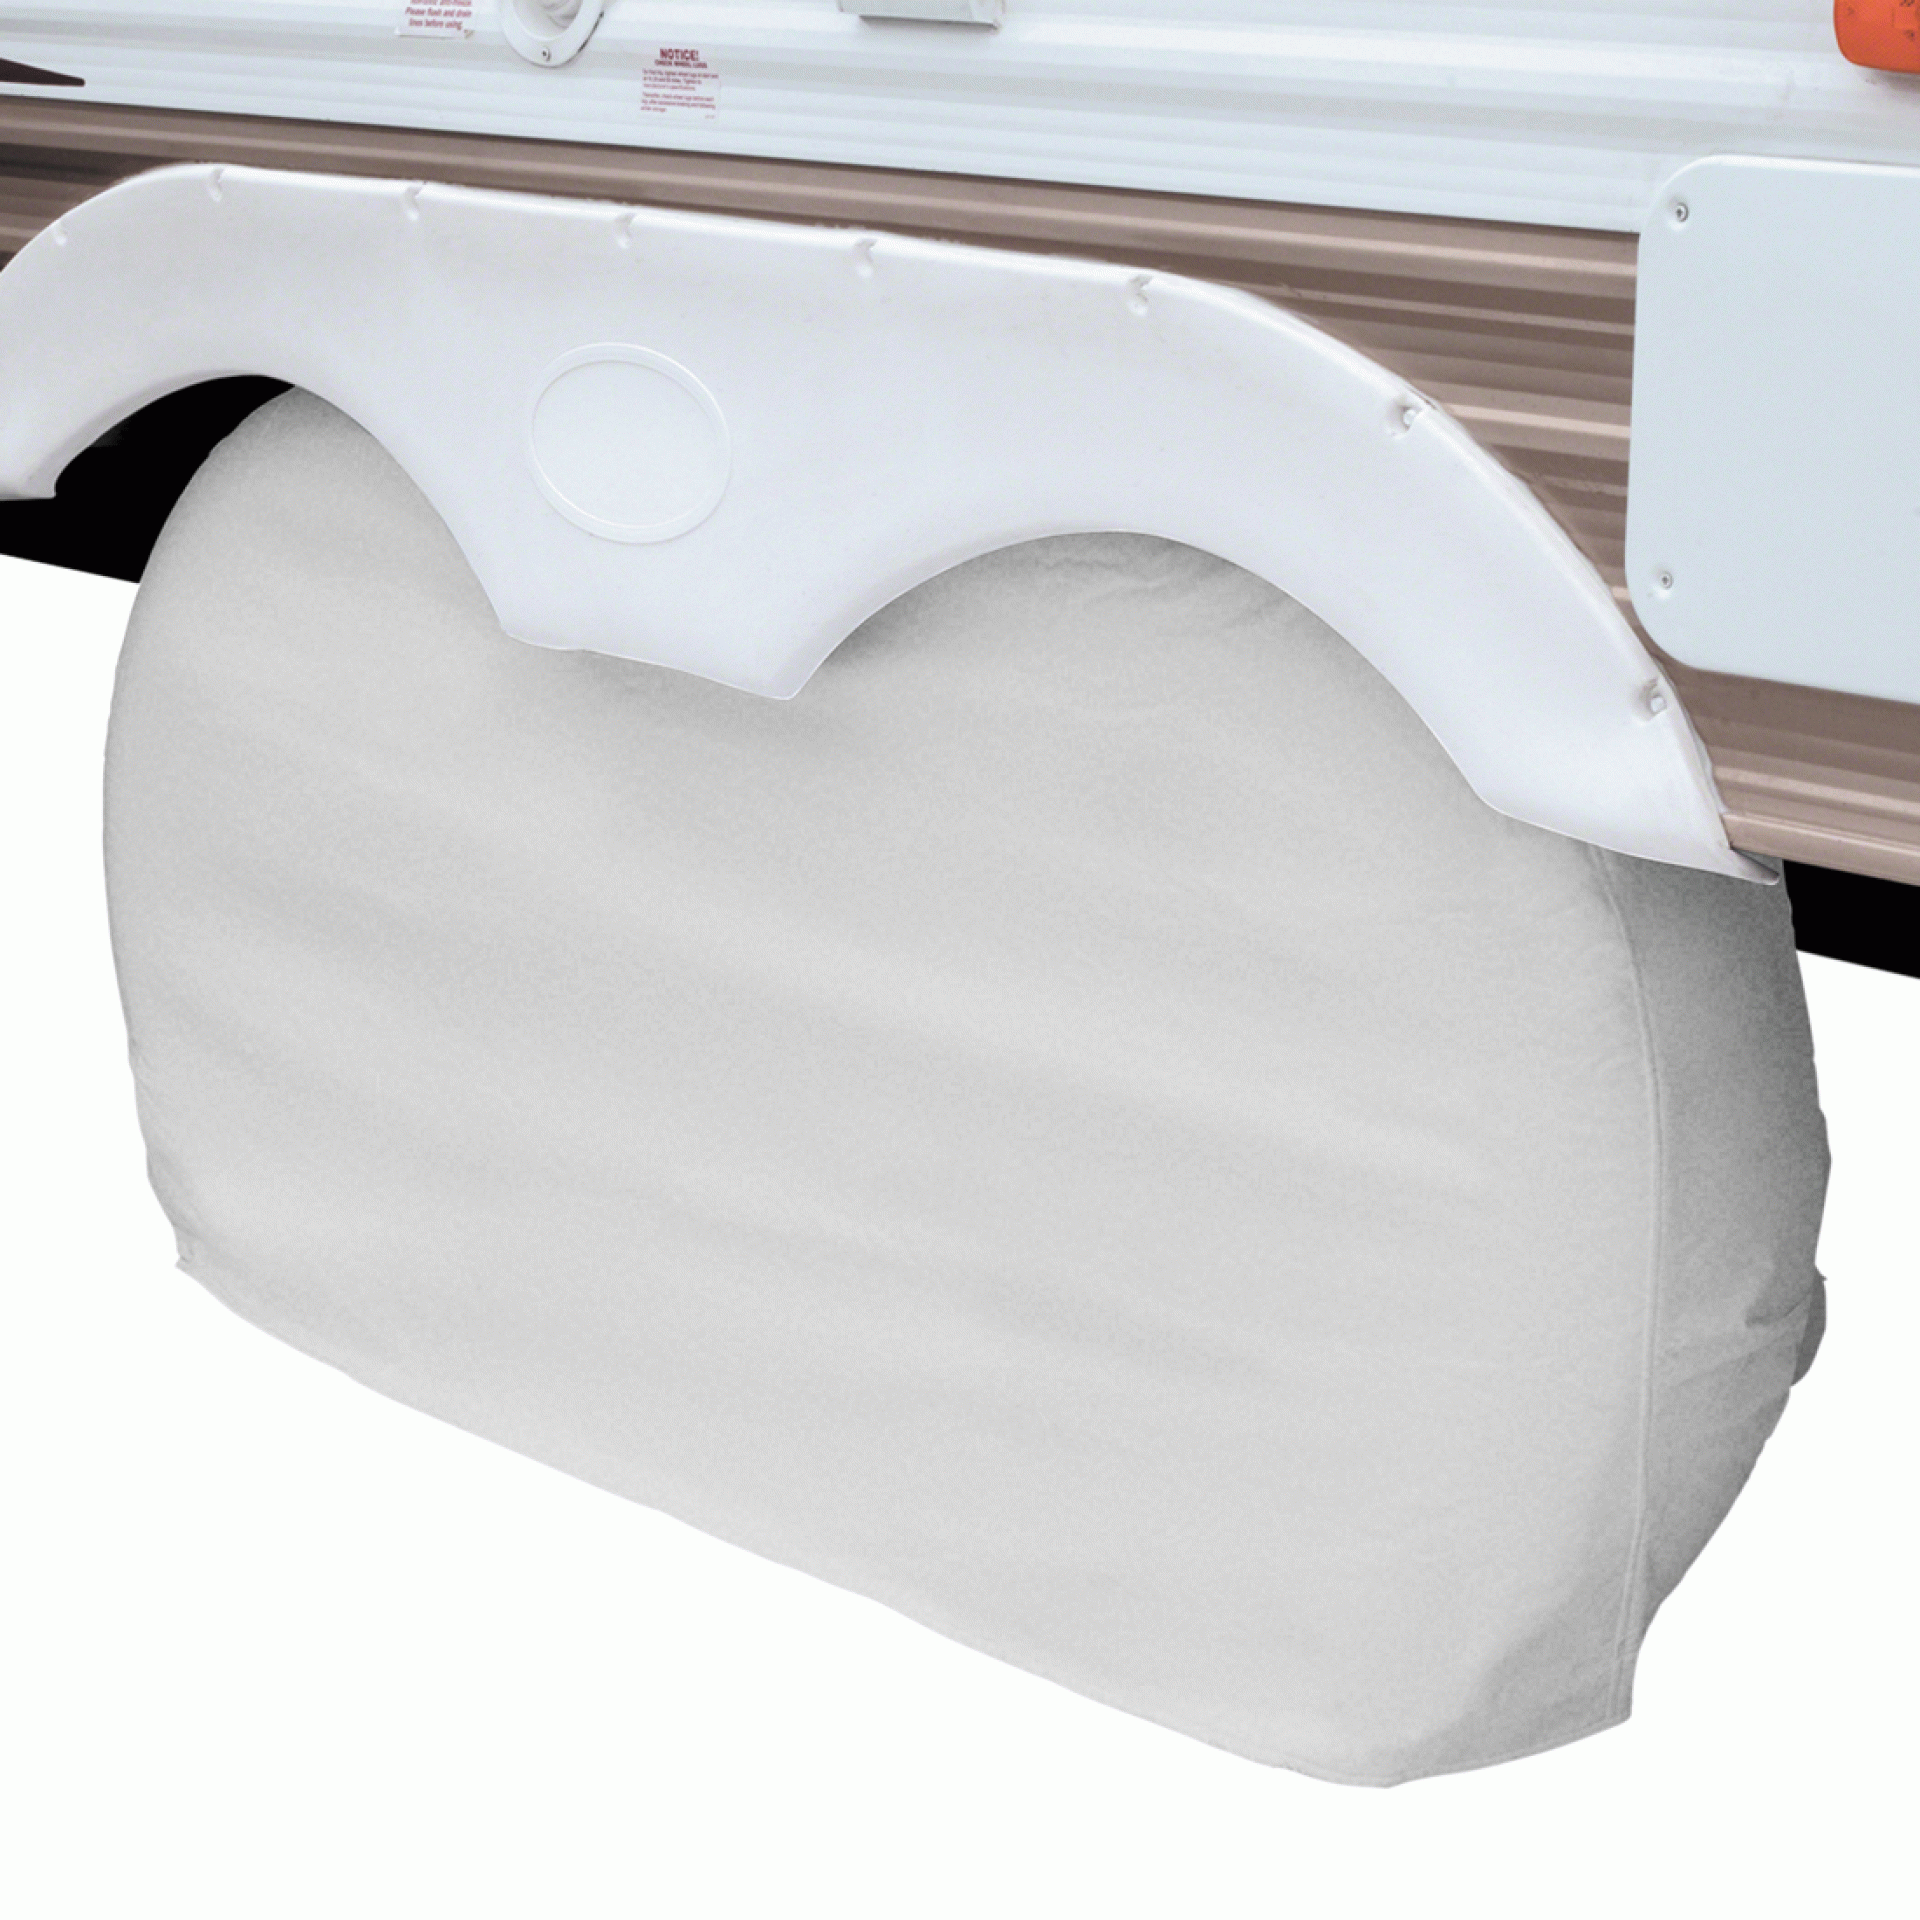 CLASSIC ACCESSORIES | 80-110-042801-00 | WHEEL COVER DUAL AXLE FITS UP TO27" - 30" DIAMETER 66"L X 8"W X 30"H - WHITE